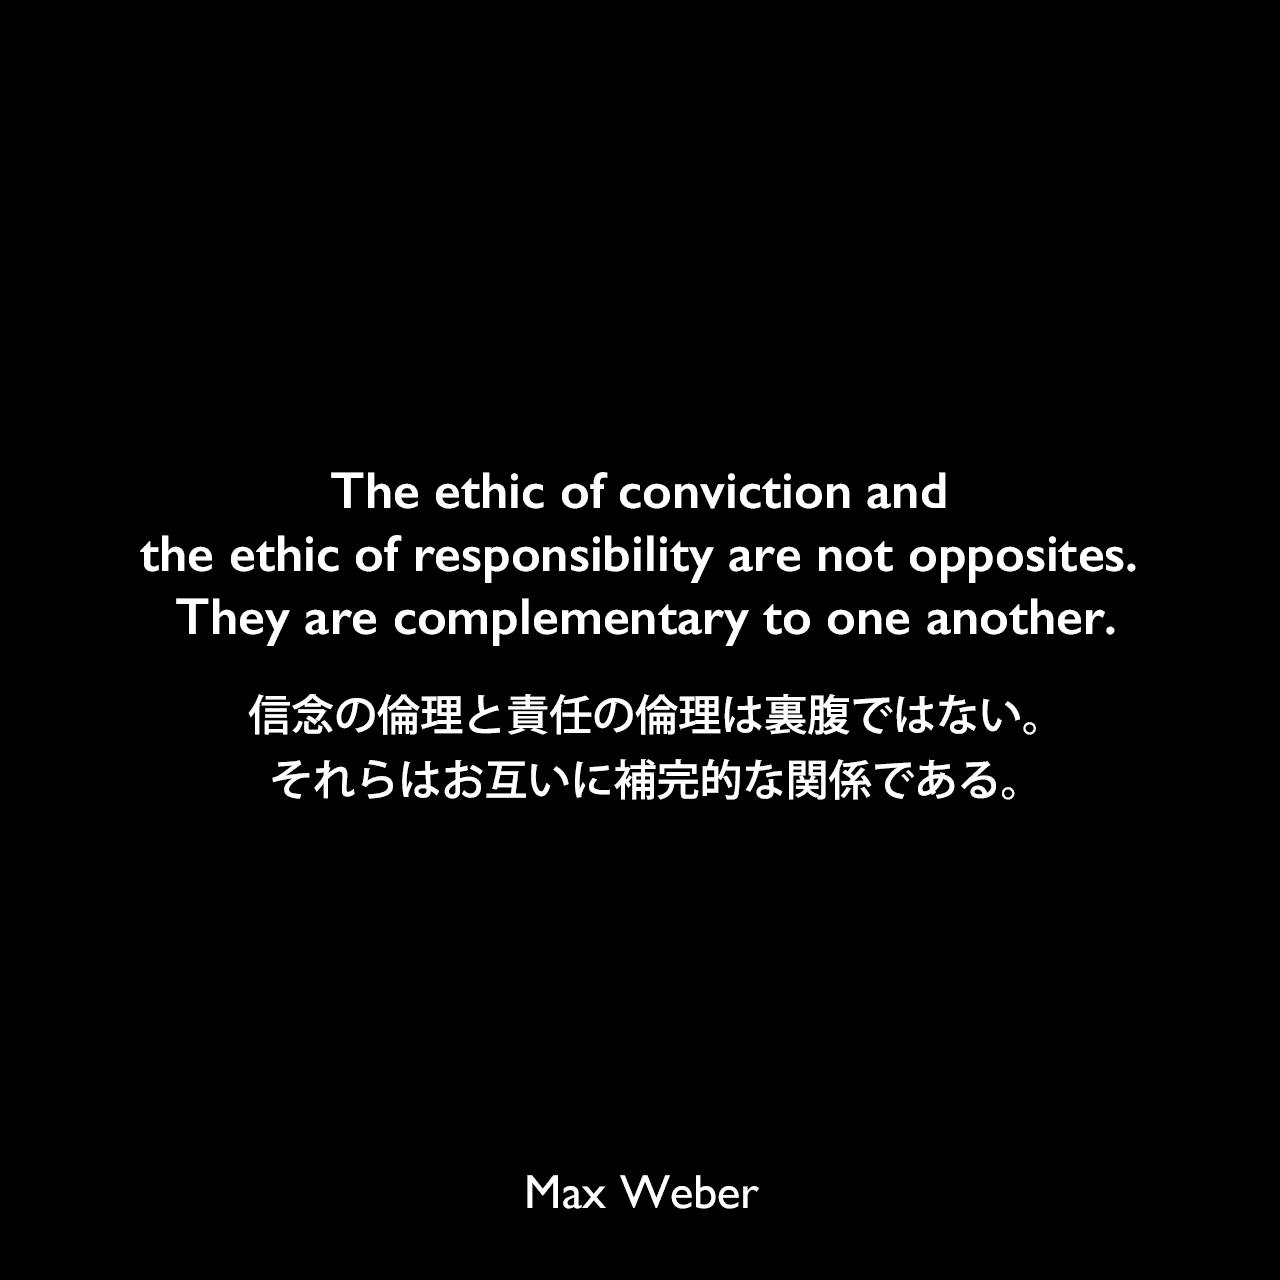 The ethic of conviction and the ethic of responsibility are not opposites. They are complementary to one another.信念の倫理と責任の倫理は裏腹ではない。それらはお互いに補完的な関係である。Max Weber